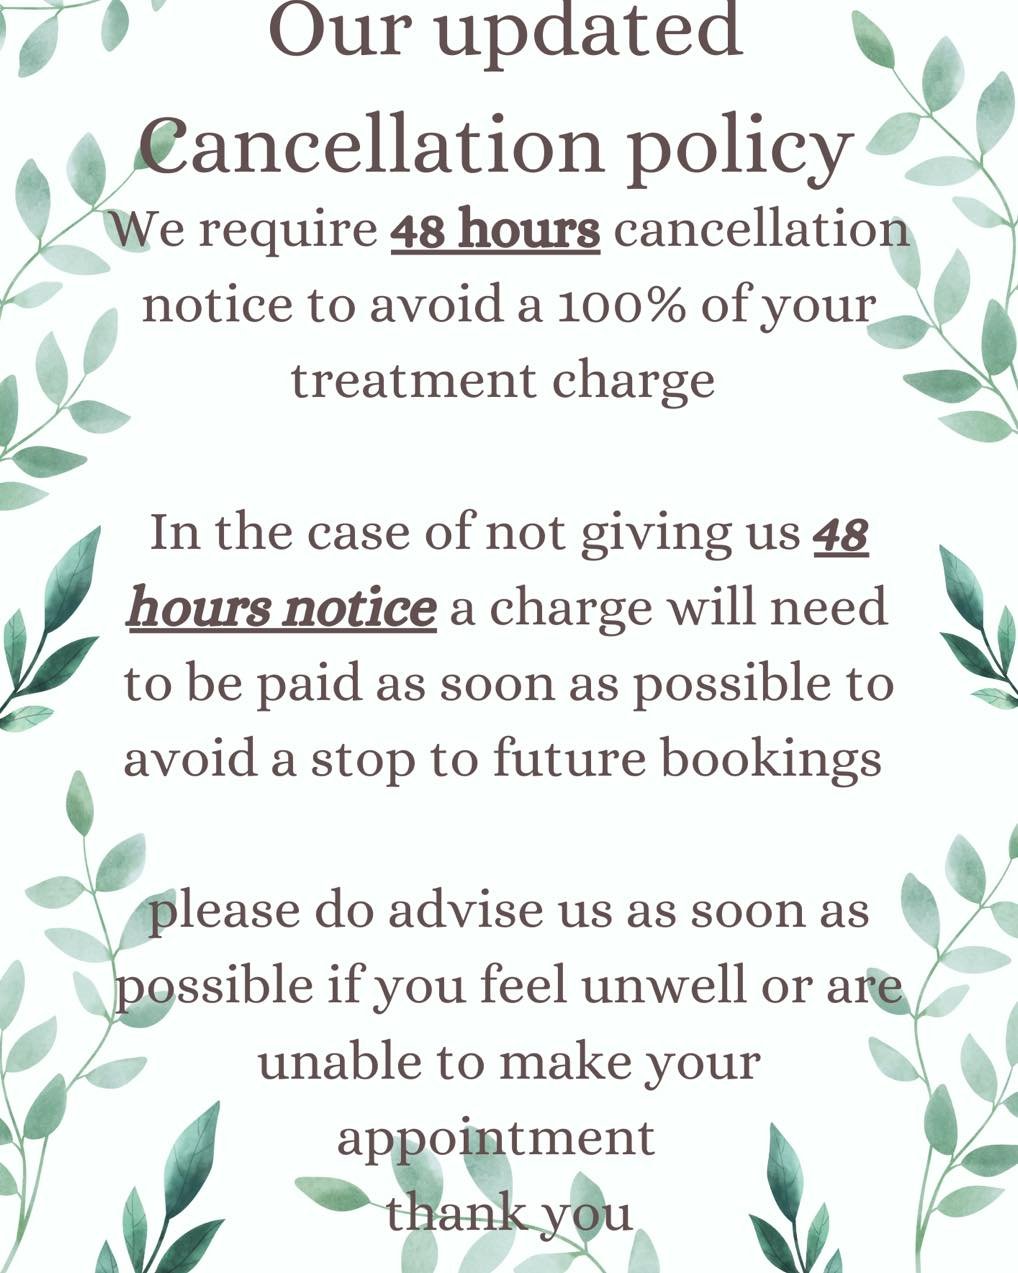 An update for our cancellation policy.
Please give us 48 hours notice if you are unable to attend your appointment🤍
Thank you 

#cancellationpolicy #beautytreatment #beauty